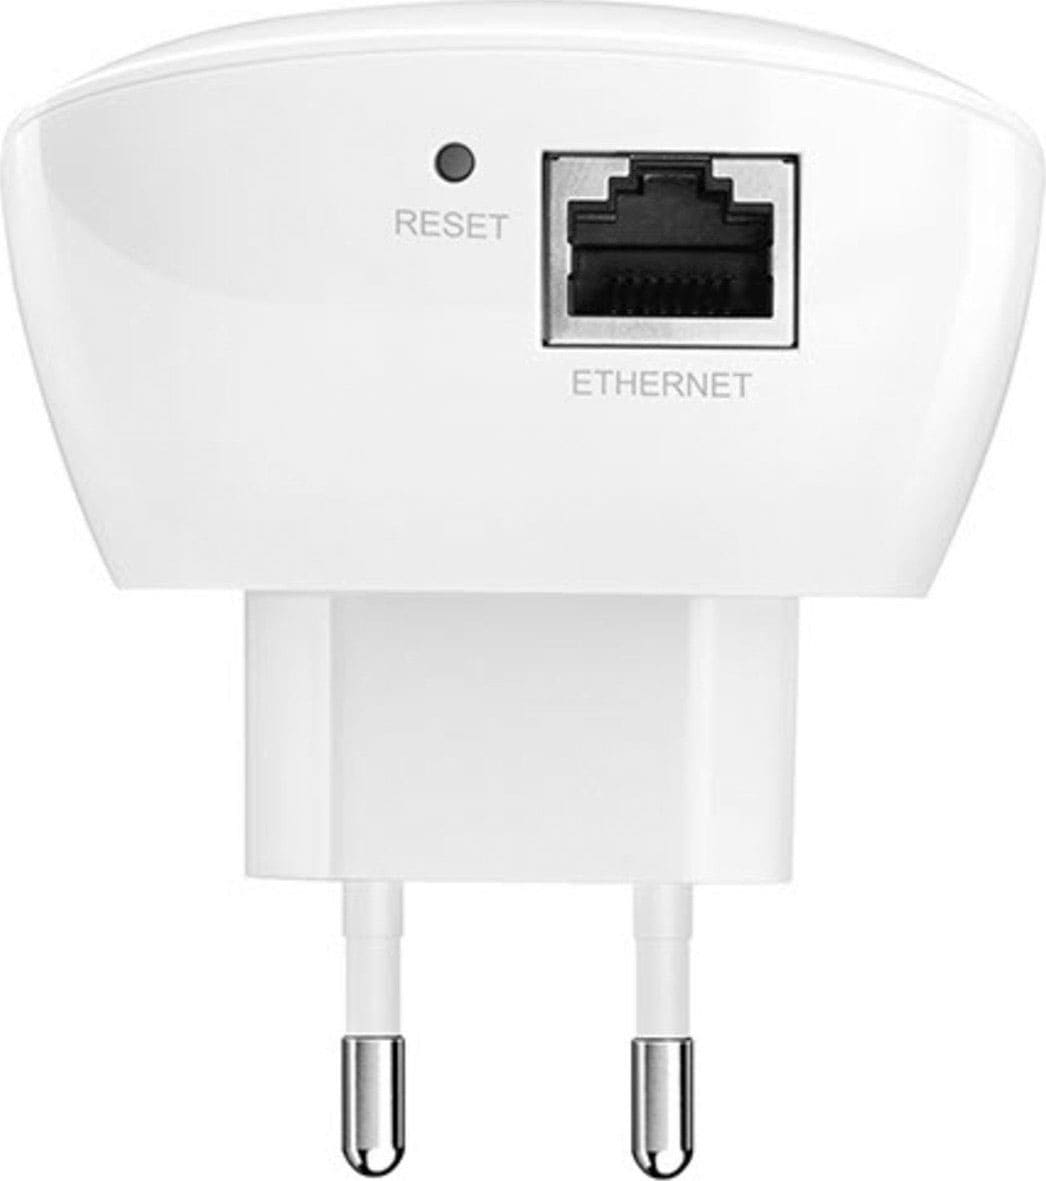 TP-Link WLAN-Repeater »TL-WA850RE«